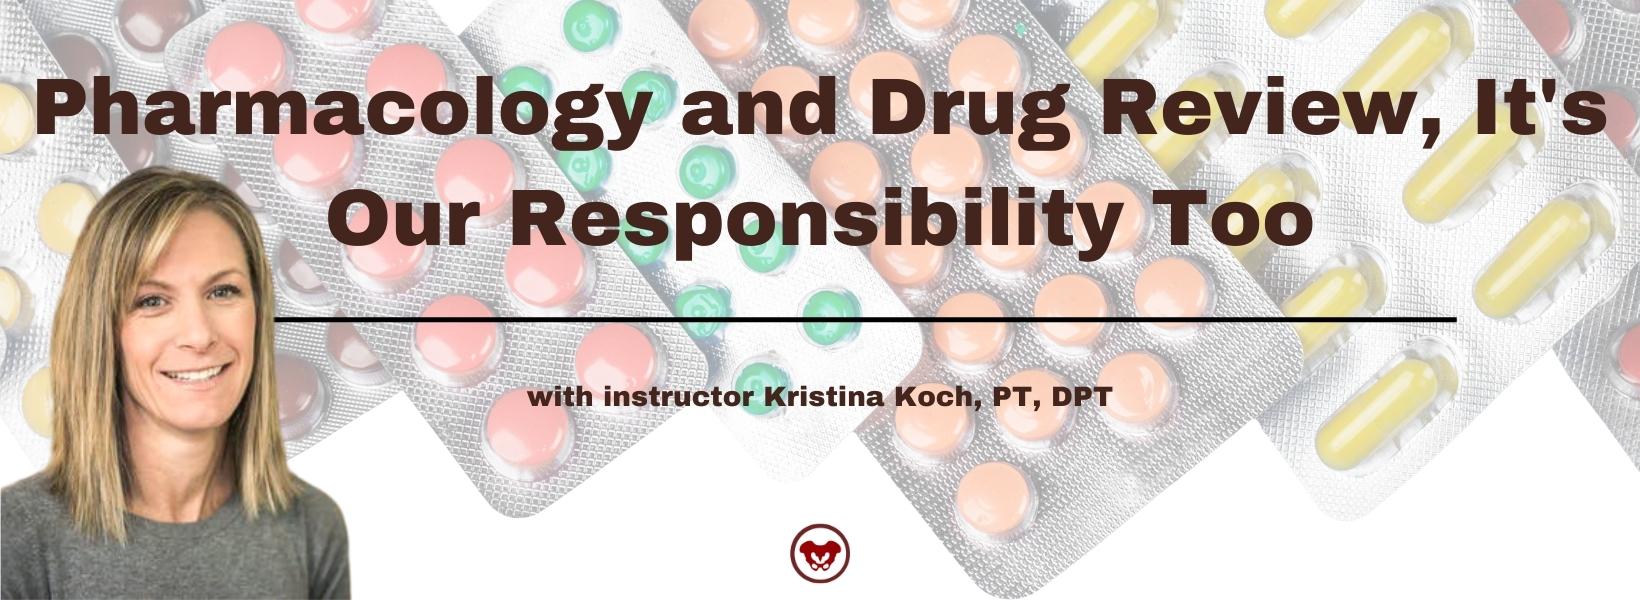 Pharmacology and Drug Review, It's Our Responsibility Too